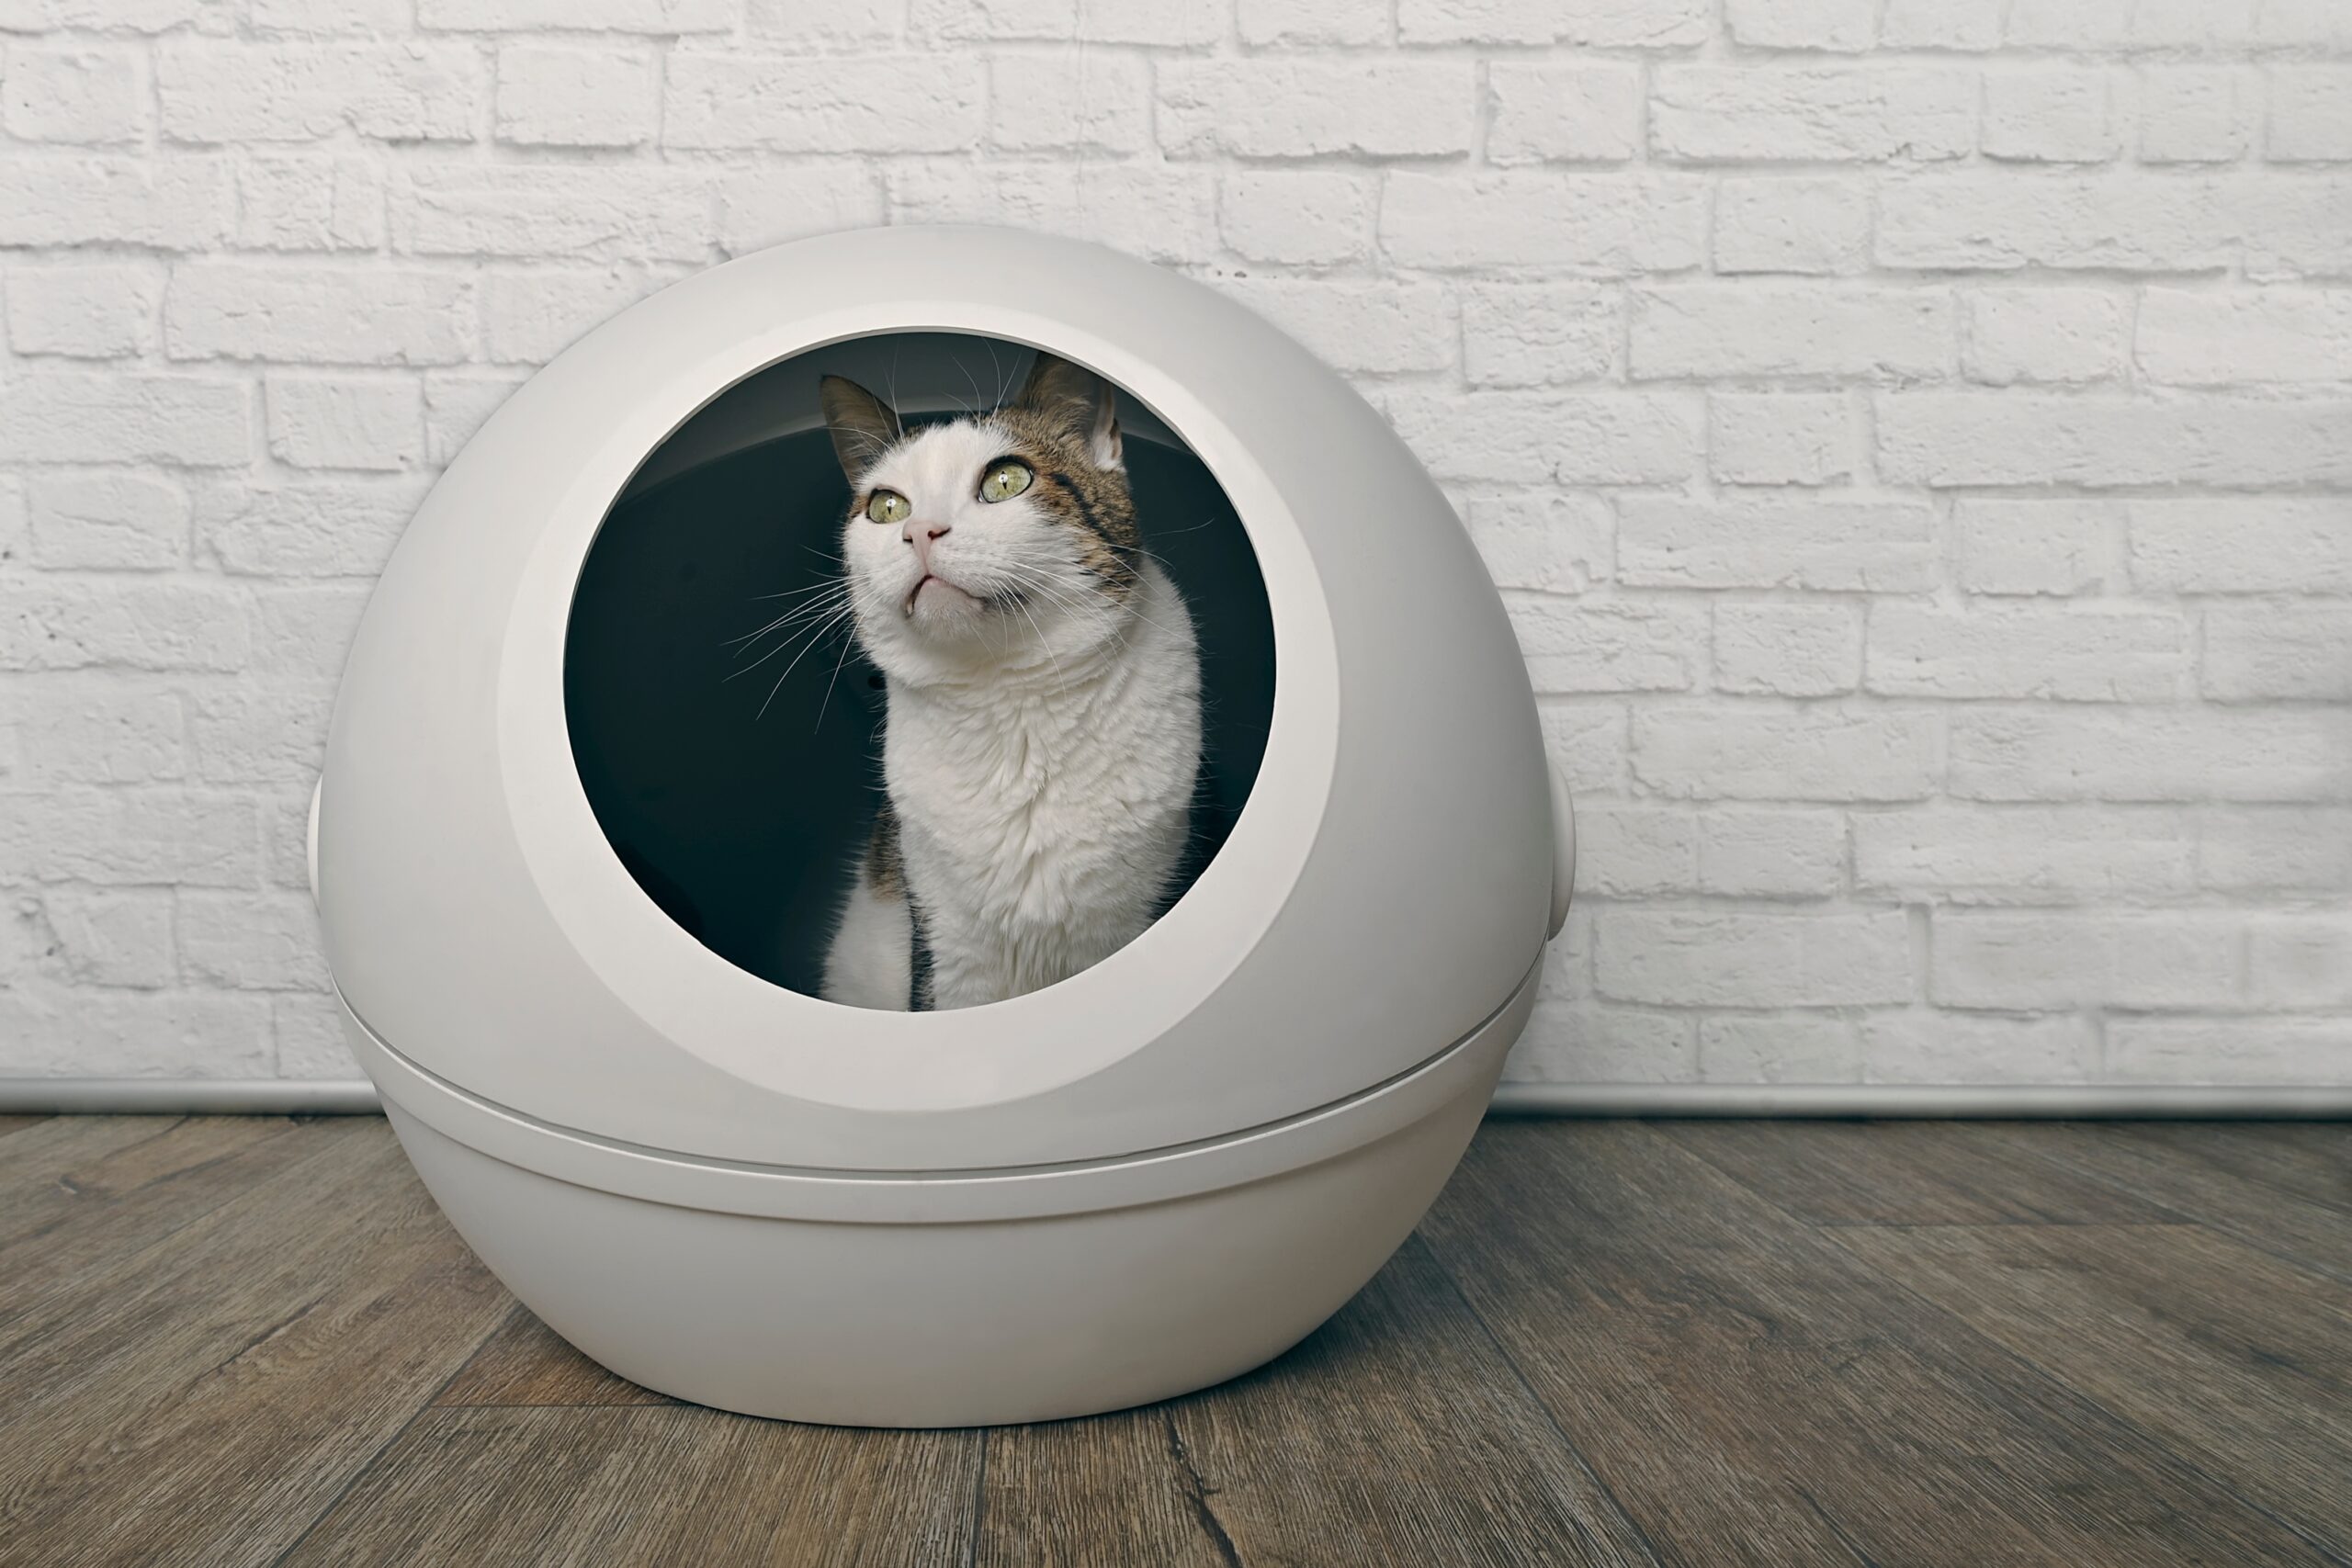 A self-cleaning litter box is designed to automatically remove waste from a cat's litter box, reducing the need for manual scooping!